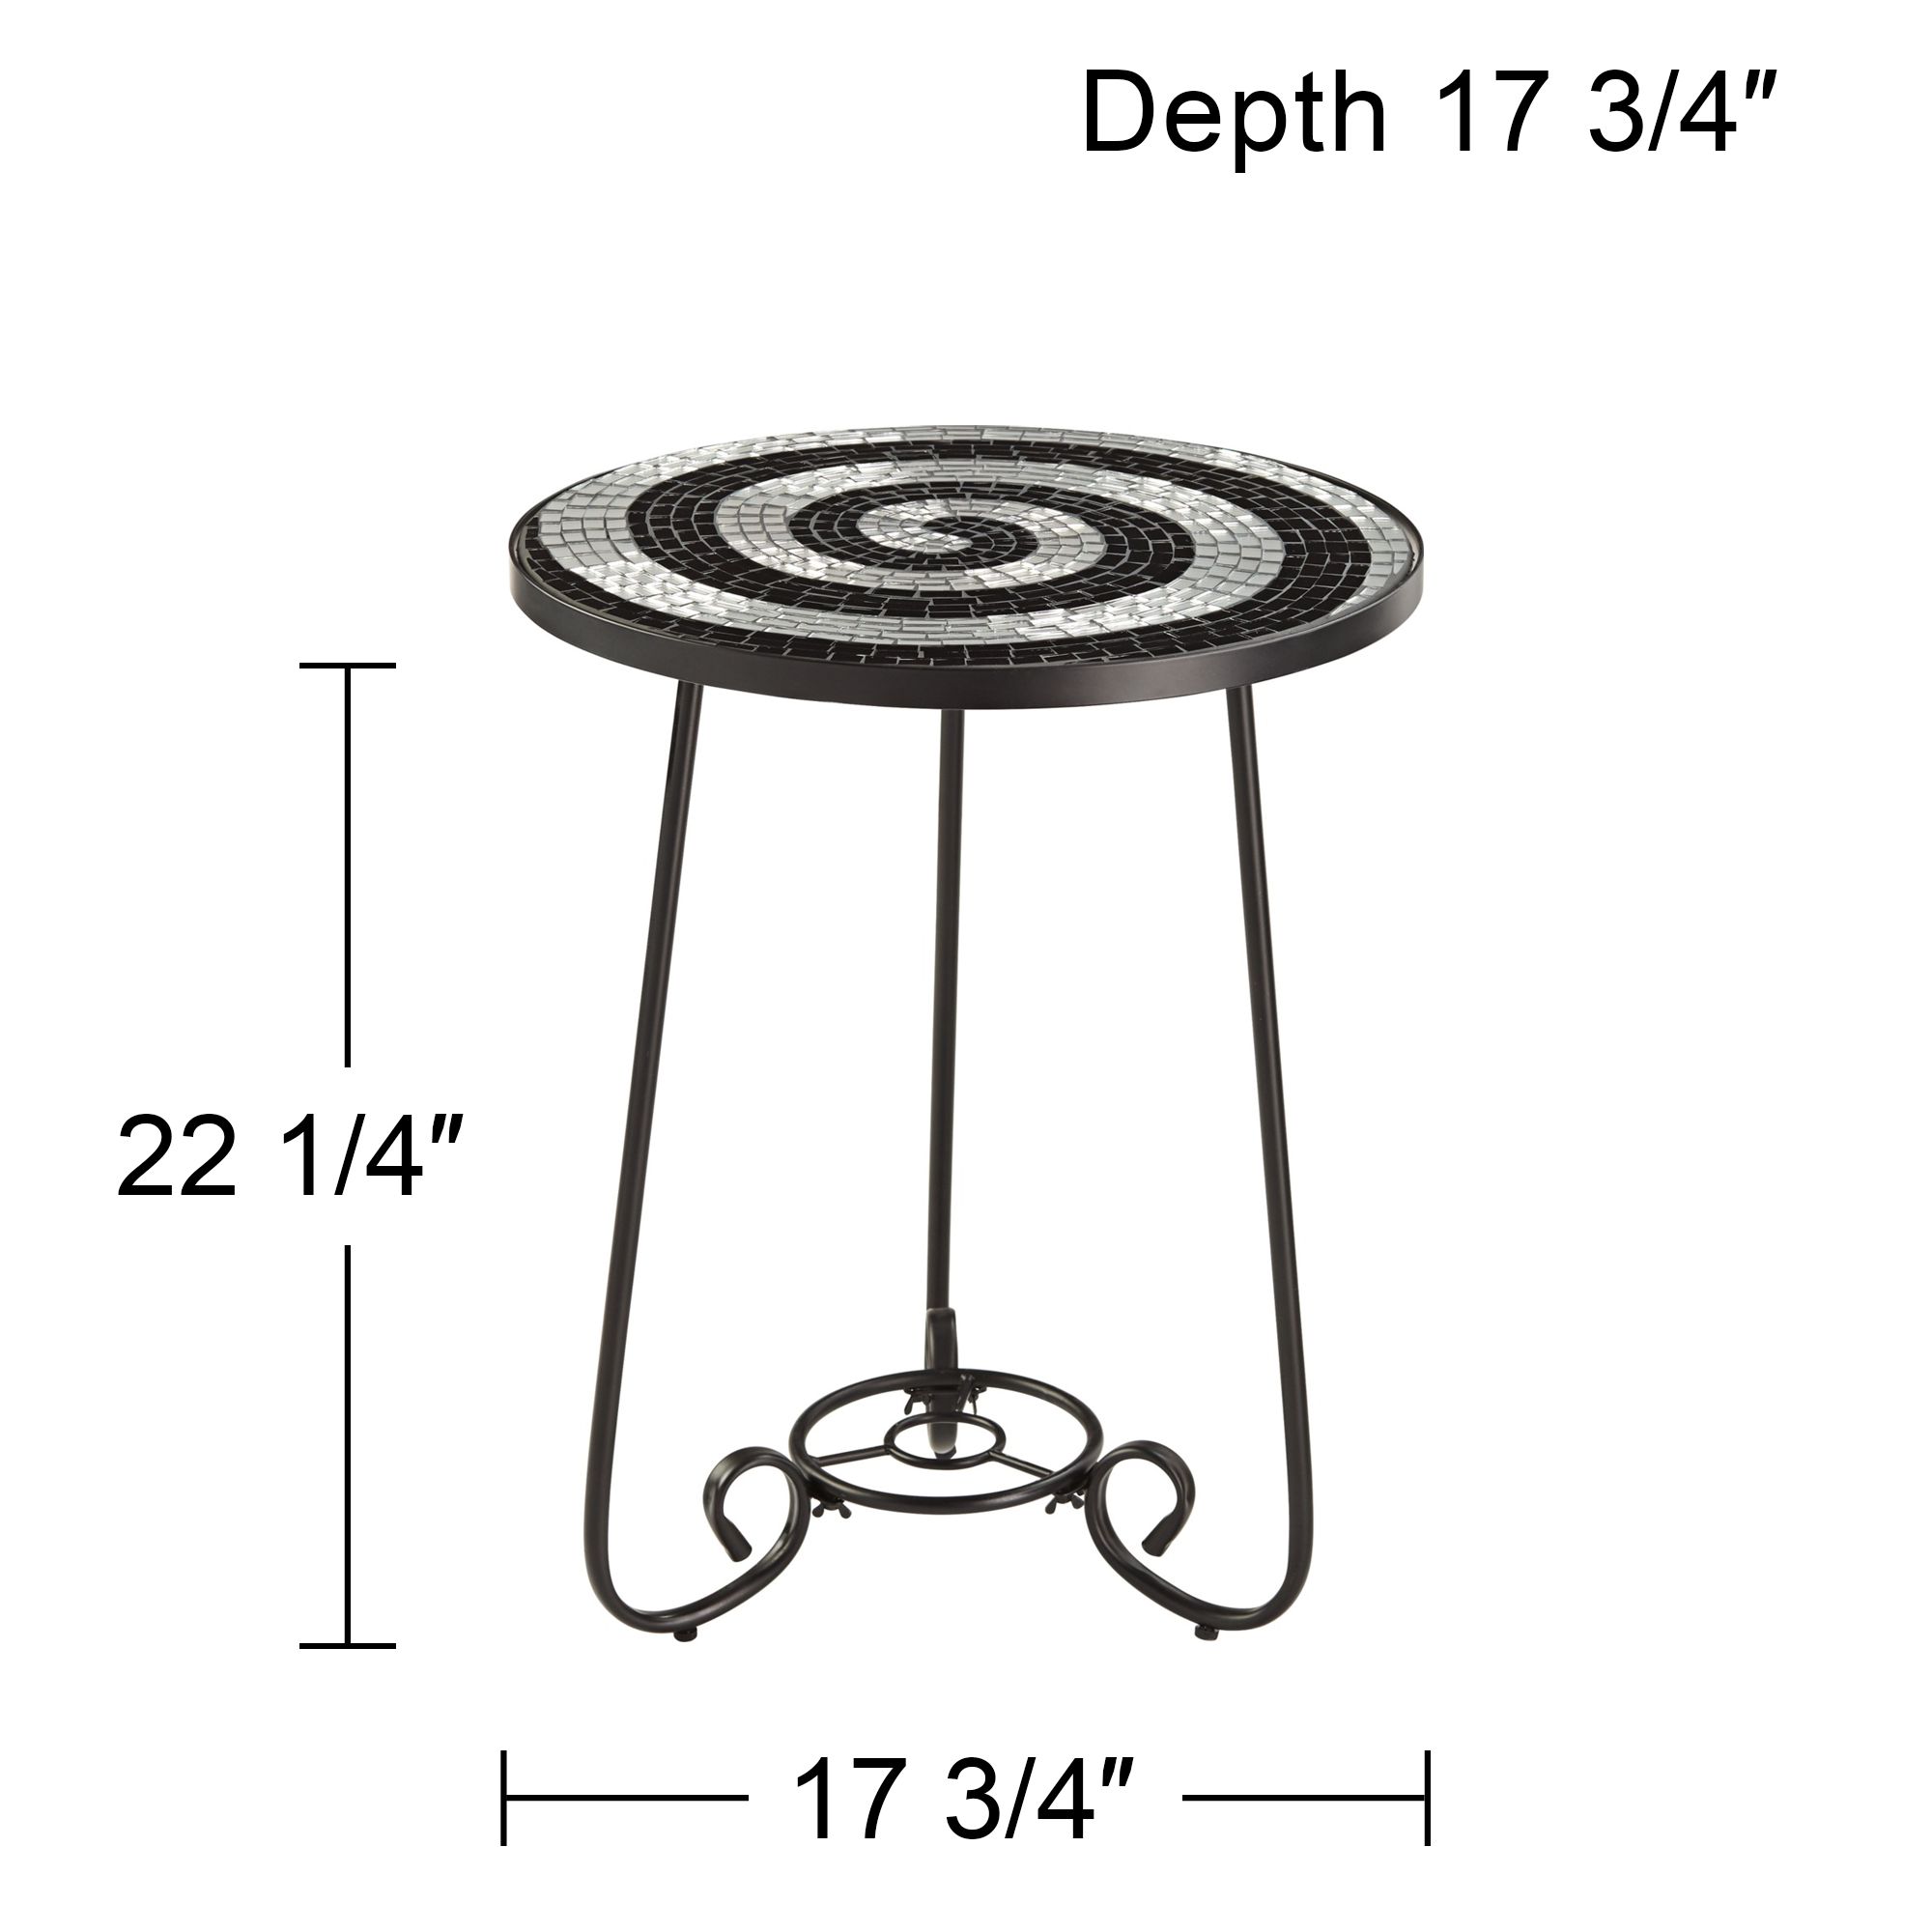 Teal Island Designs Modern Black Round Outdoor Accent Side Table 17 3/4" Wide Black White Tile Mosaic Tabletop Front Porch Patio Home House - image 4 of 8